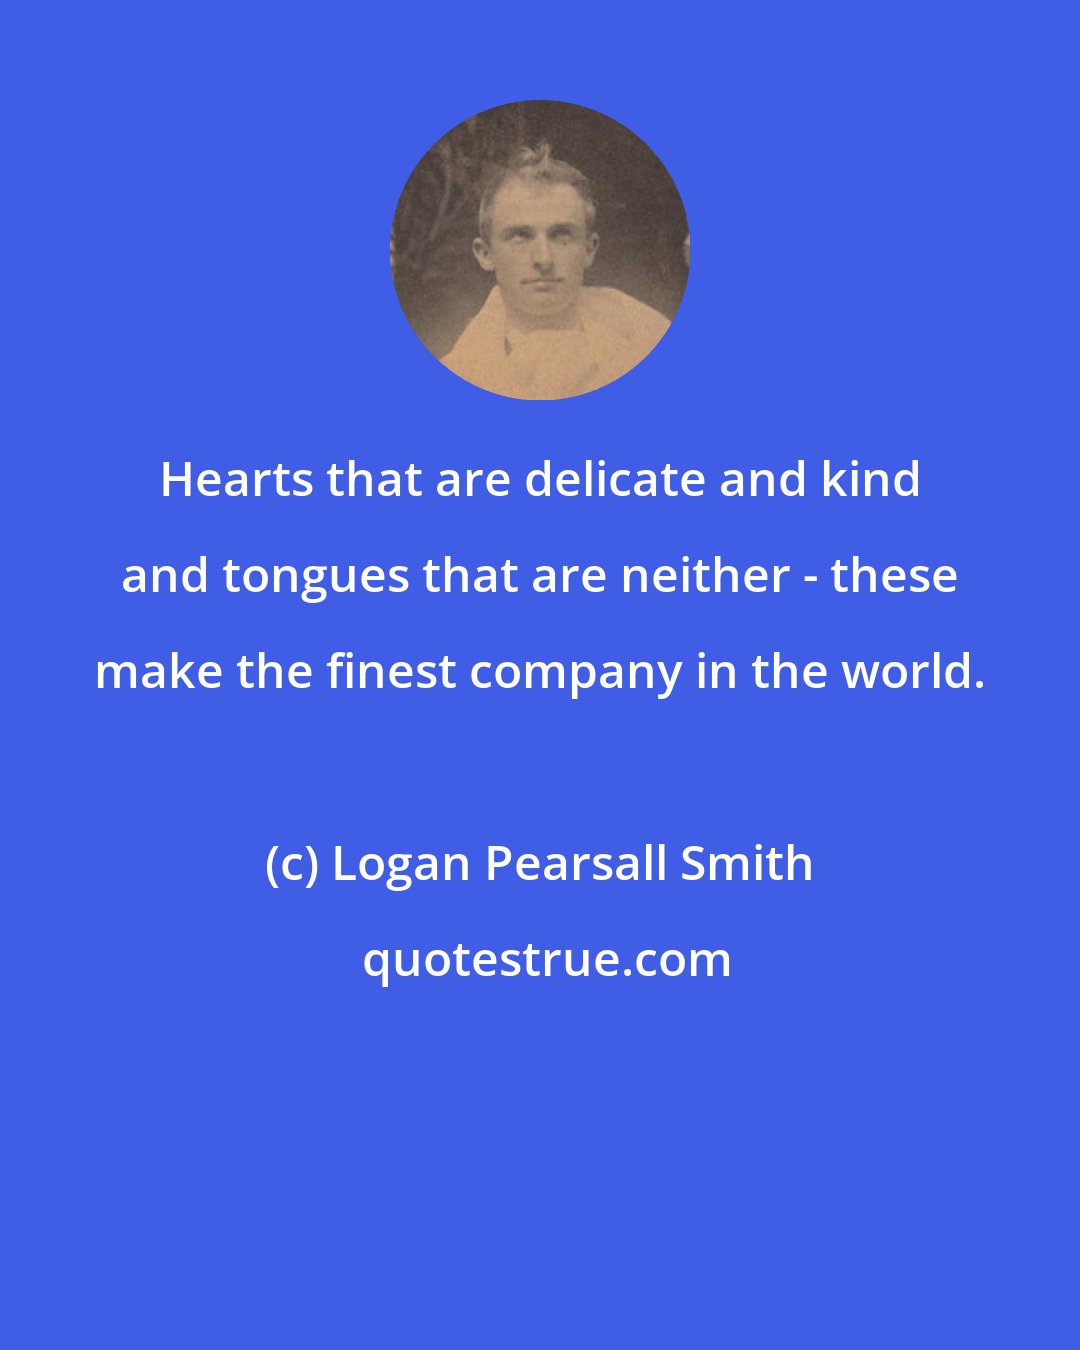 Logan Pearsall Smith: Hearts that are delicate and kind and tongues that are neither - these make the finest company in the world.